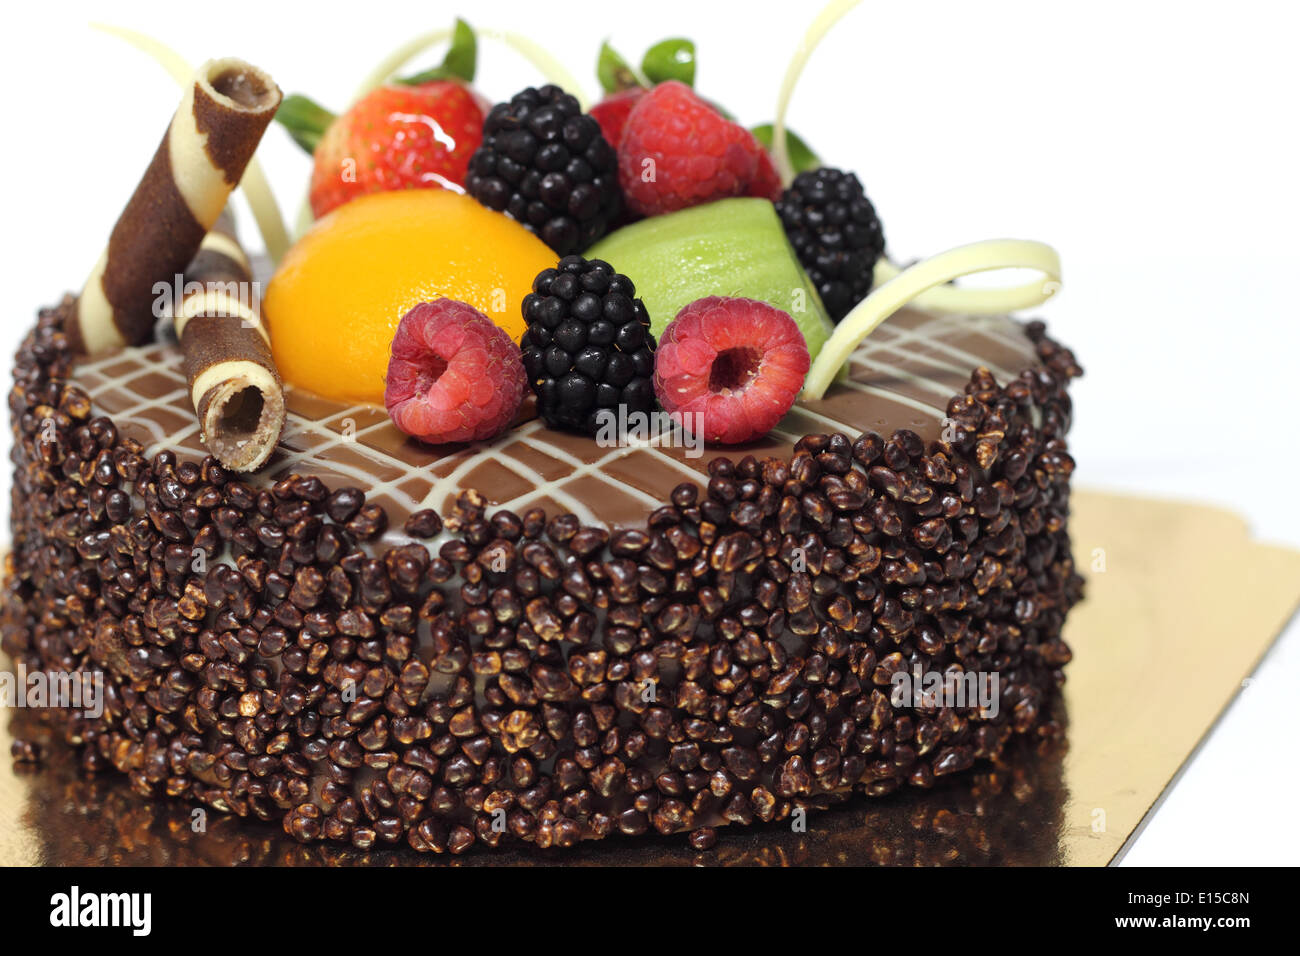 A Delicious chocolate strawberry cake with chocolate ganache. Stock Photo